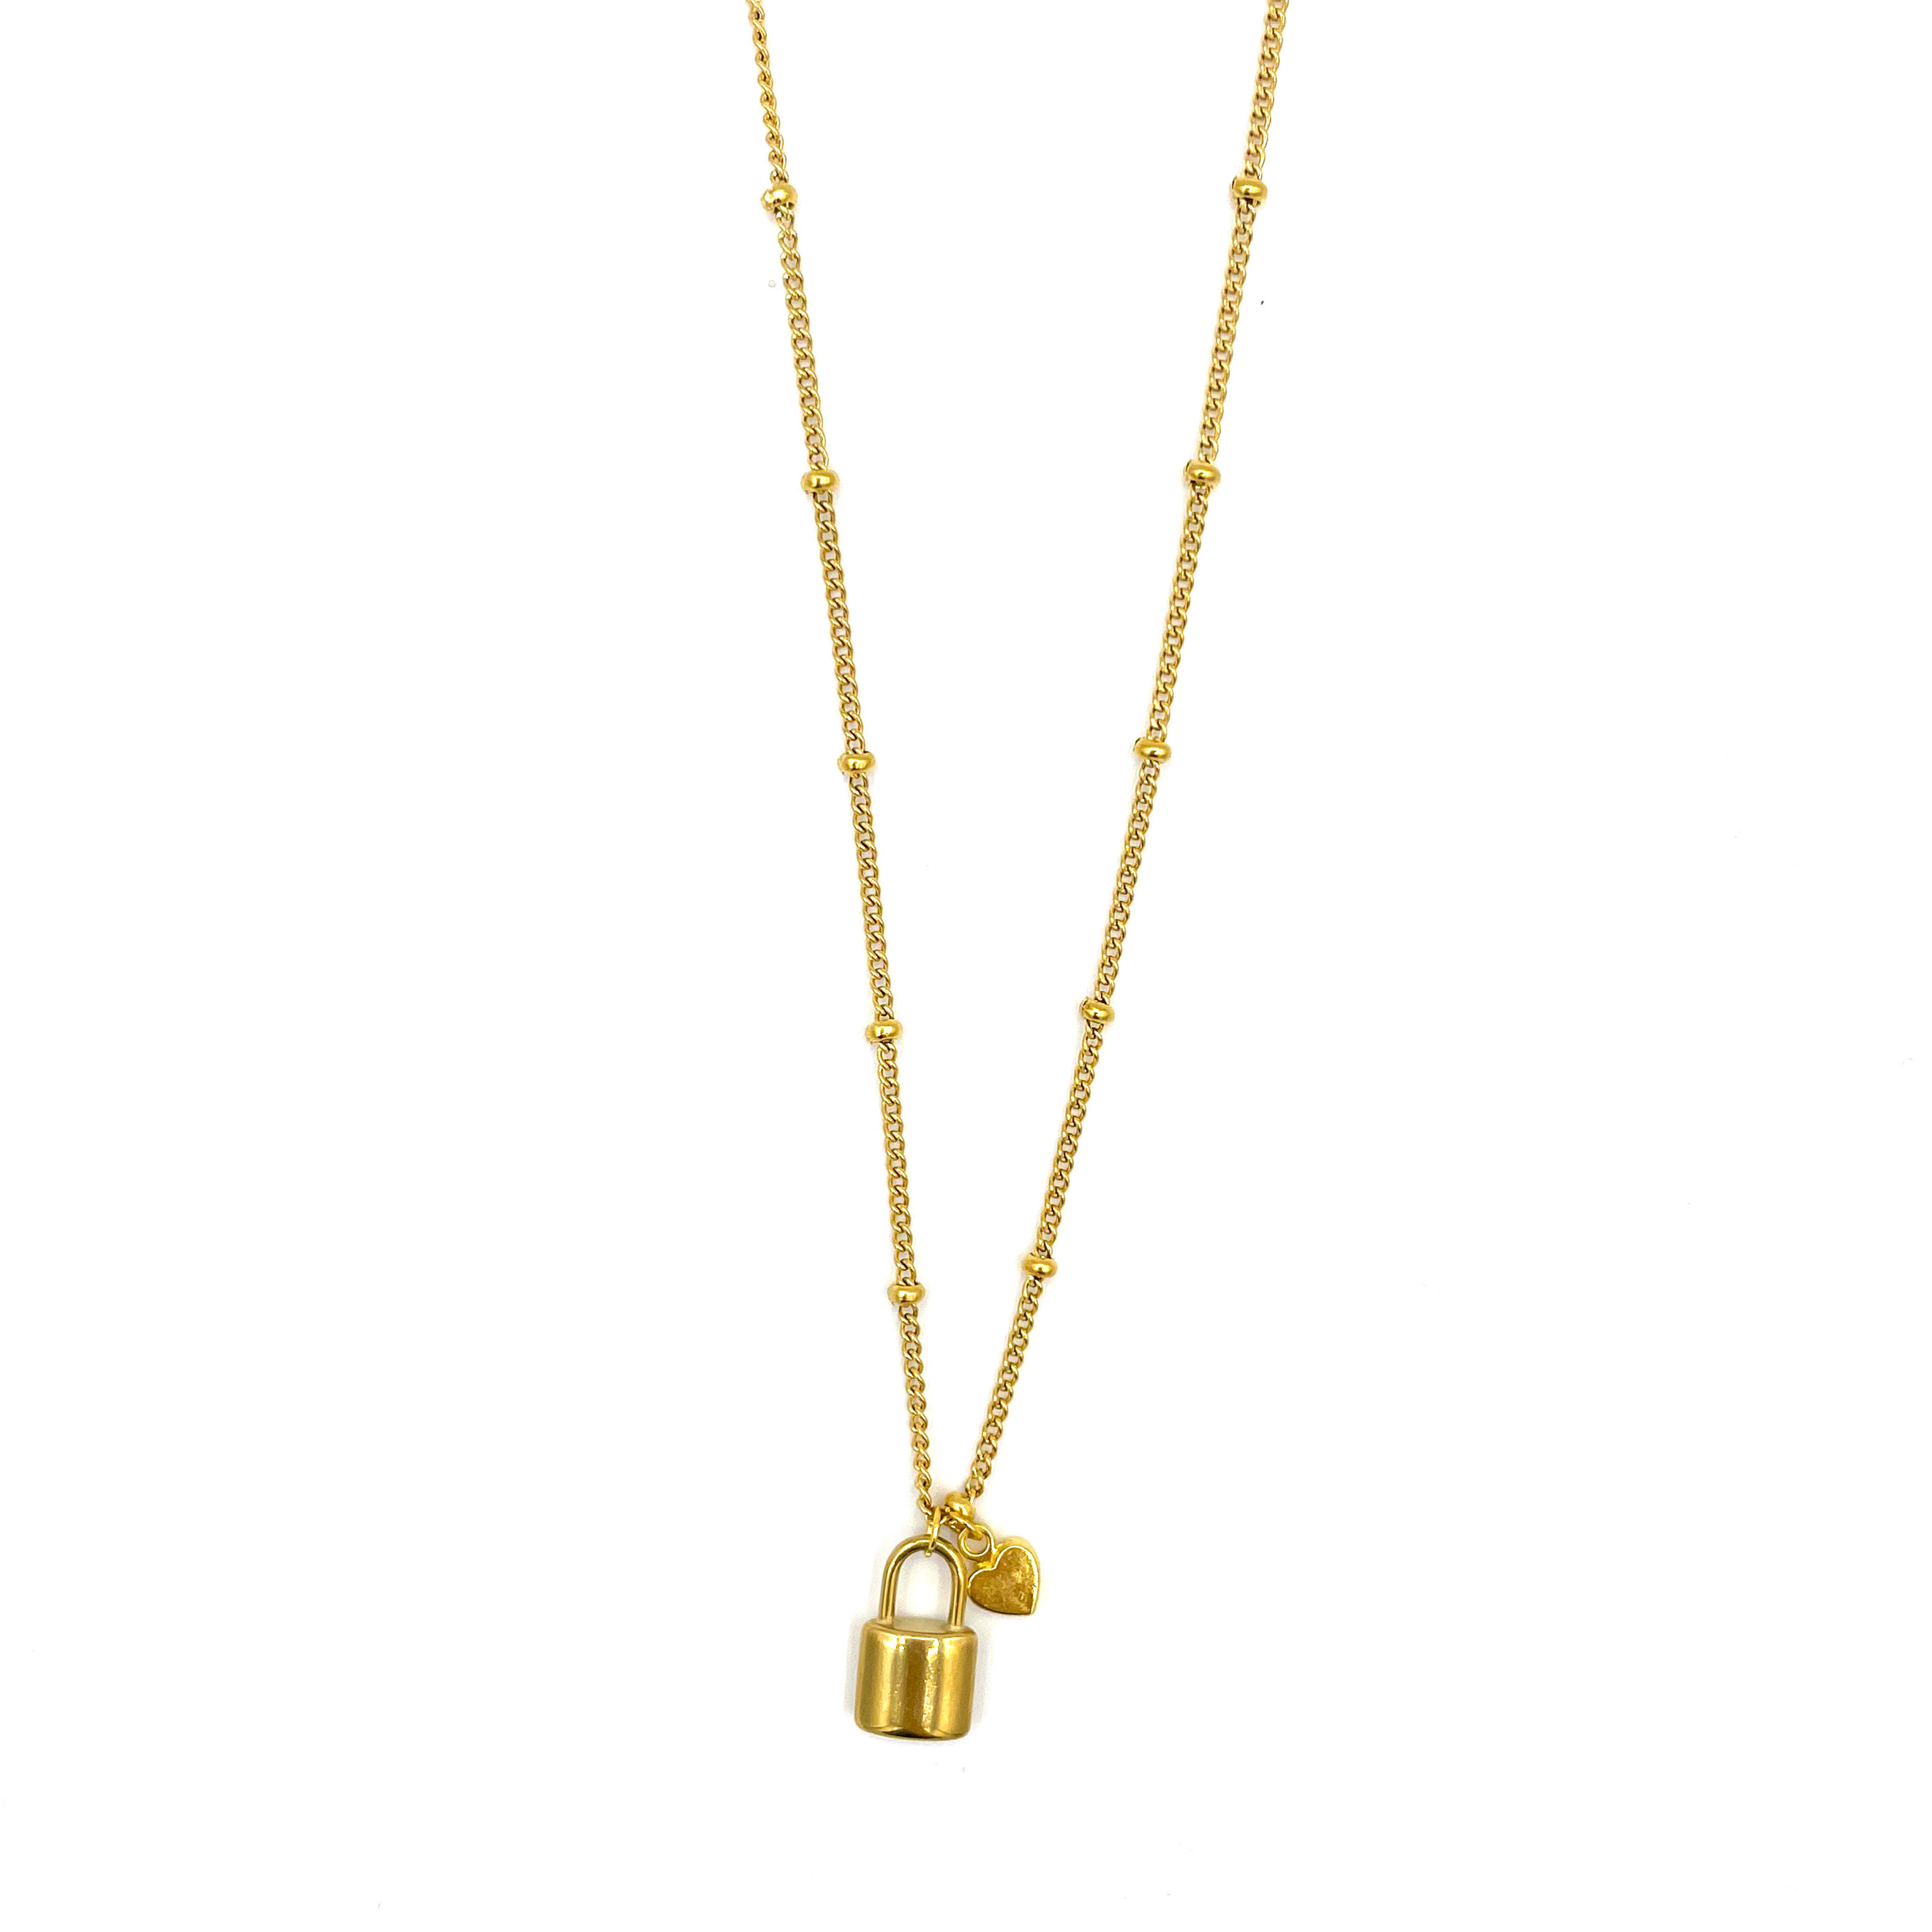 Gold heart lock necklace